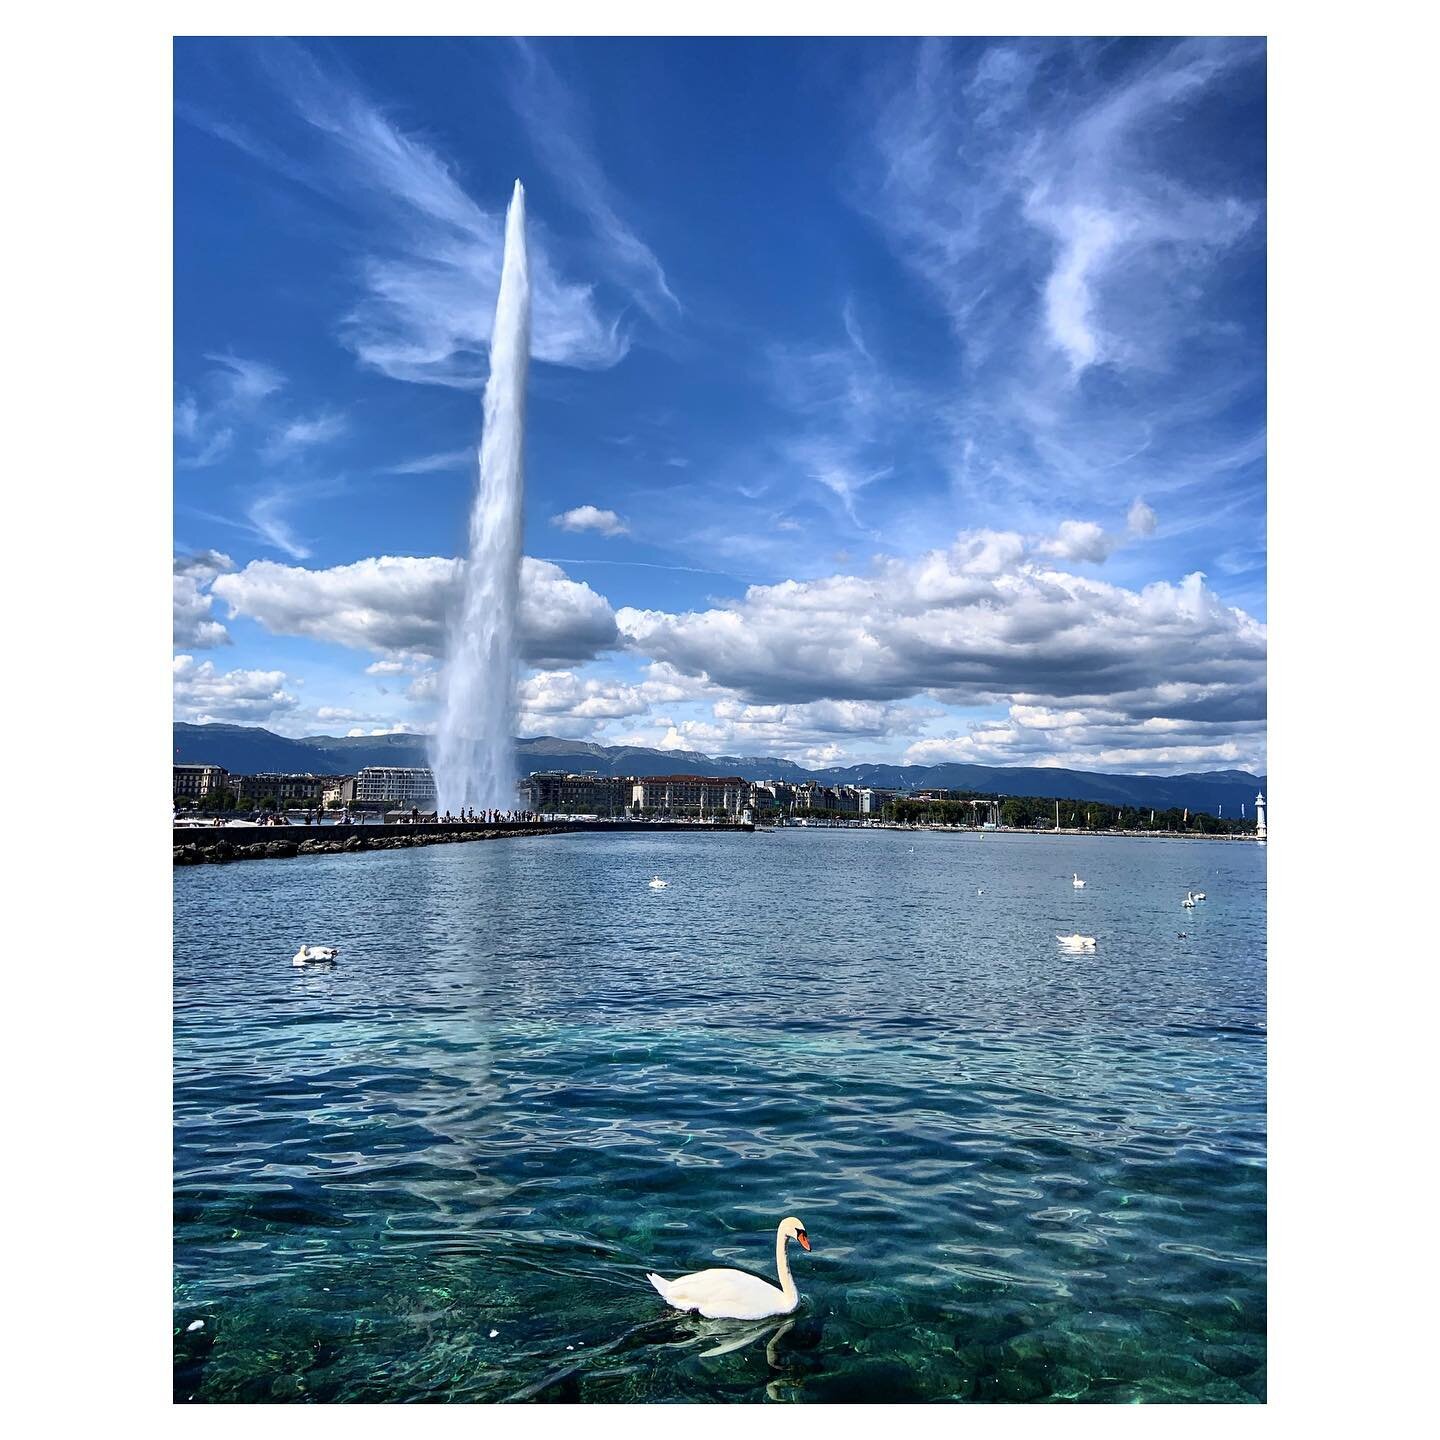 Those Geneva Whites and Blues 🤍💙
*
Another favorite city to spend days wandering around - especially on summer days like this 💞
*
📍Geneva, Switzerland 🇨🇭
*
*
*
#wanderfuljourneys #geneva #switzerland #europe #bestcitybreaks